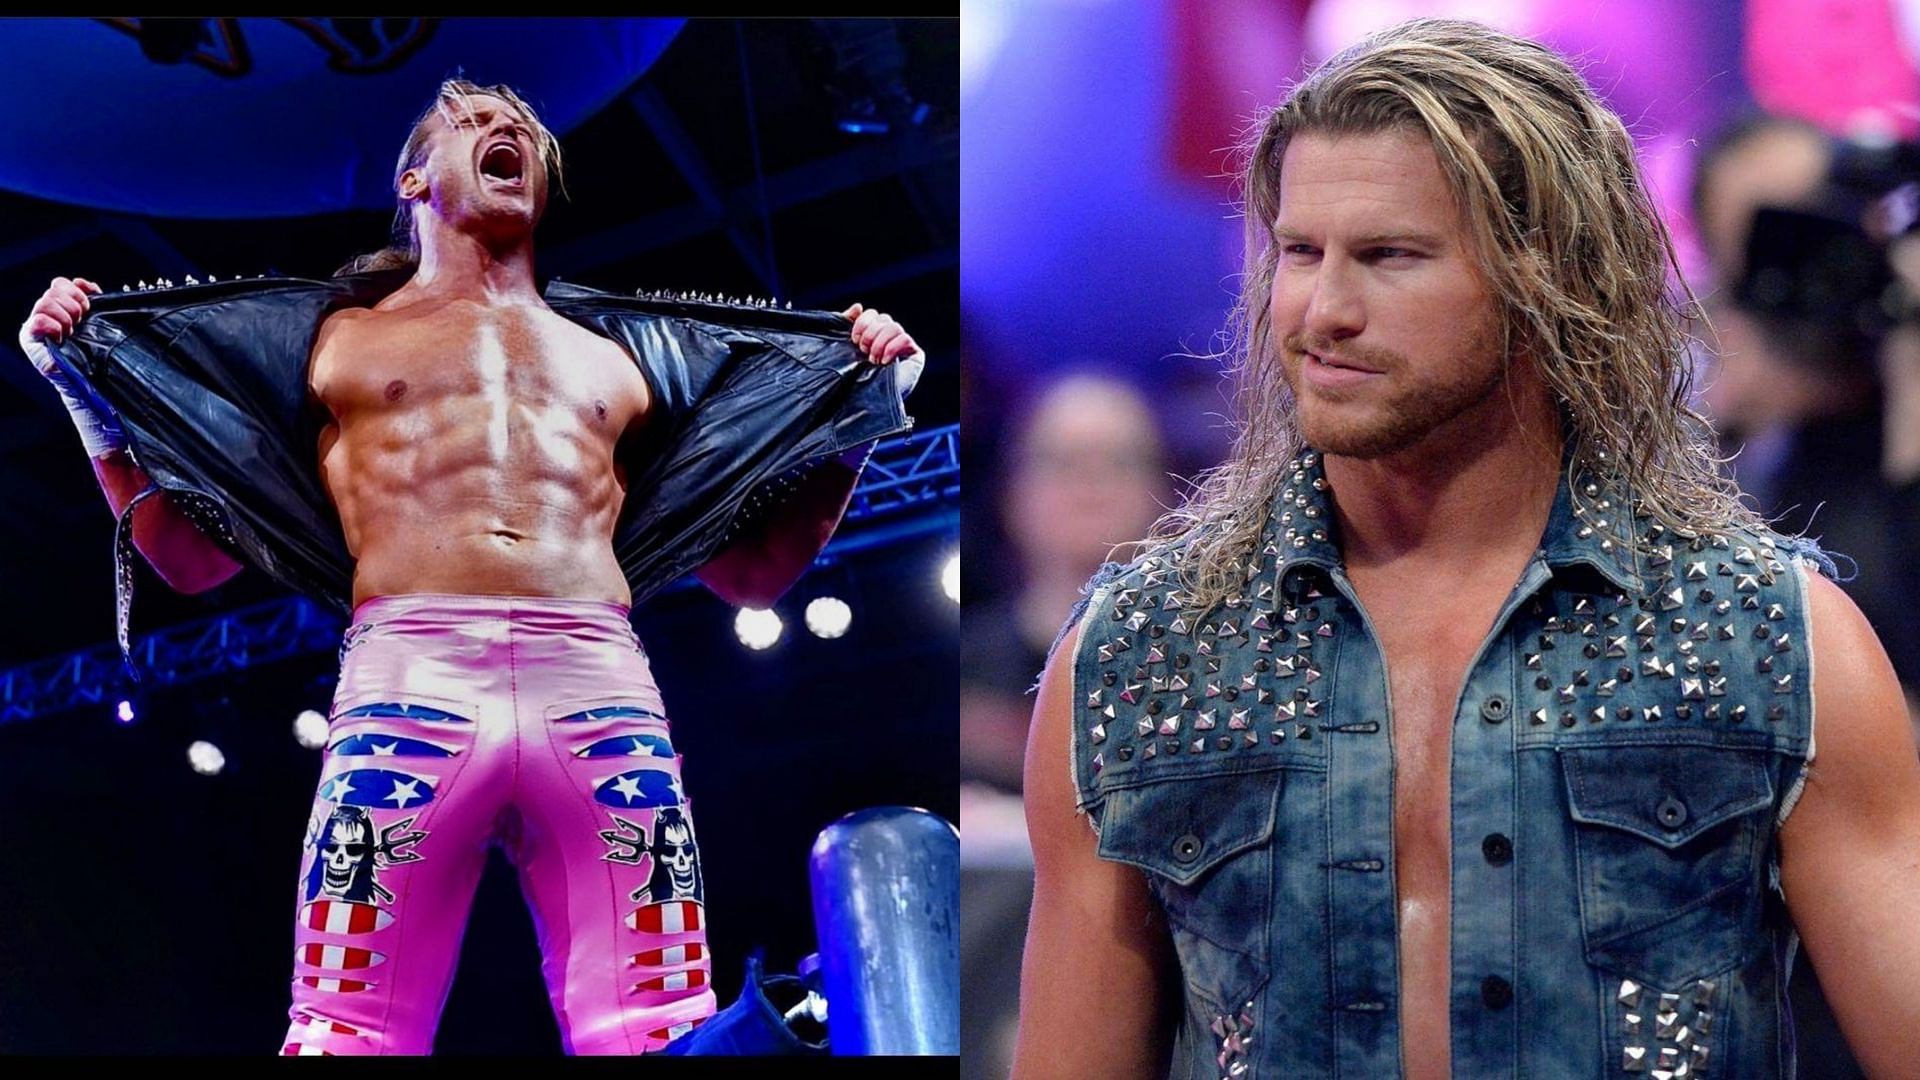 Dolph Ziggler has been active in WWE for nearly two decades